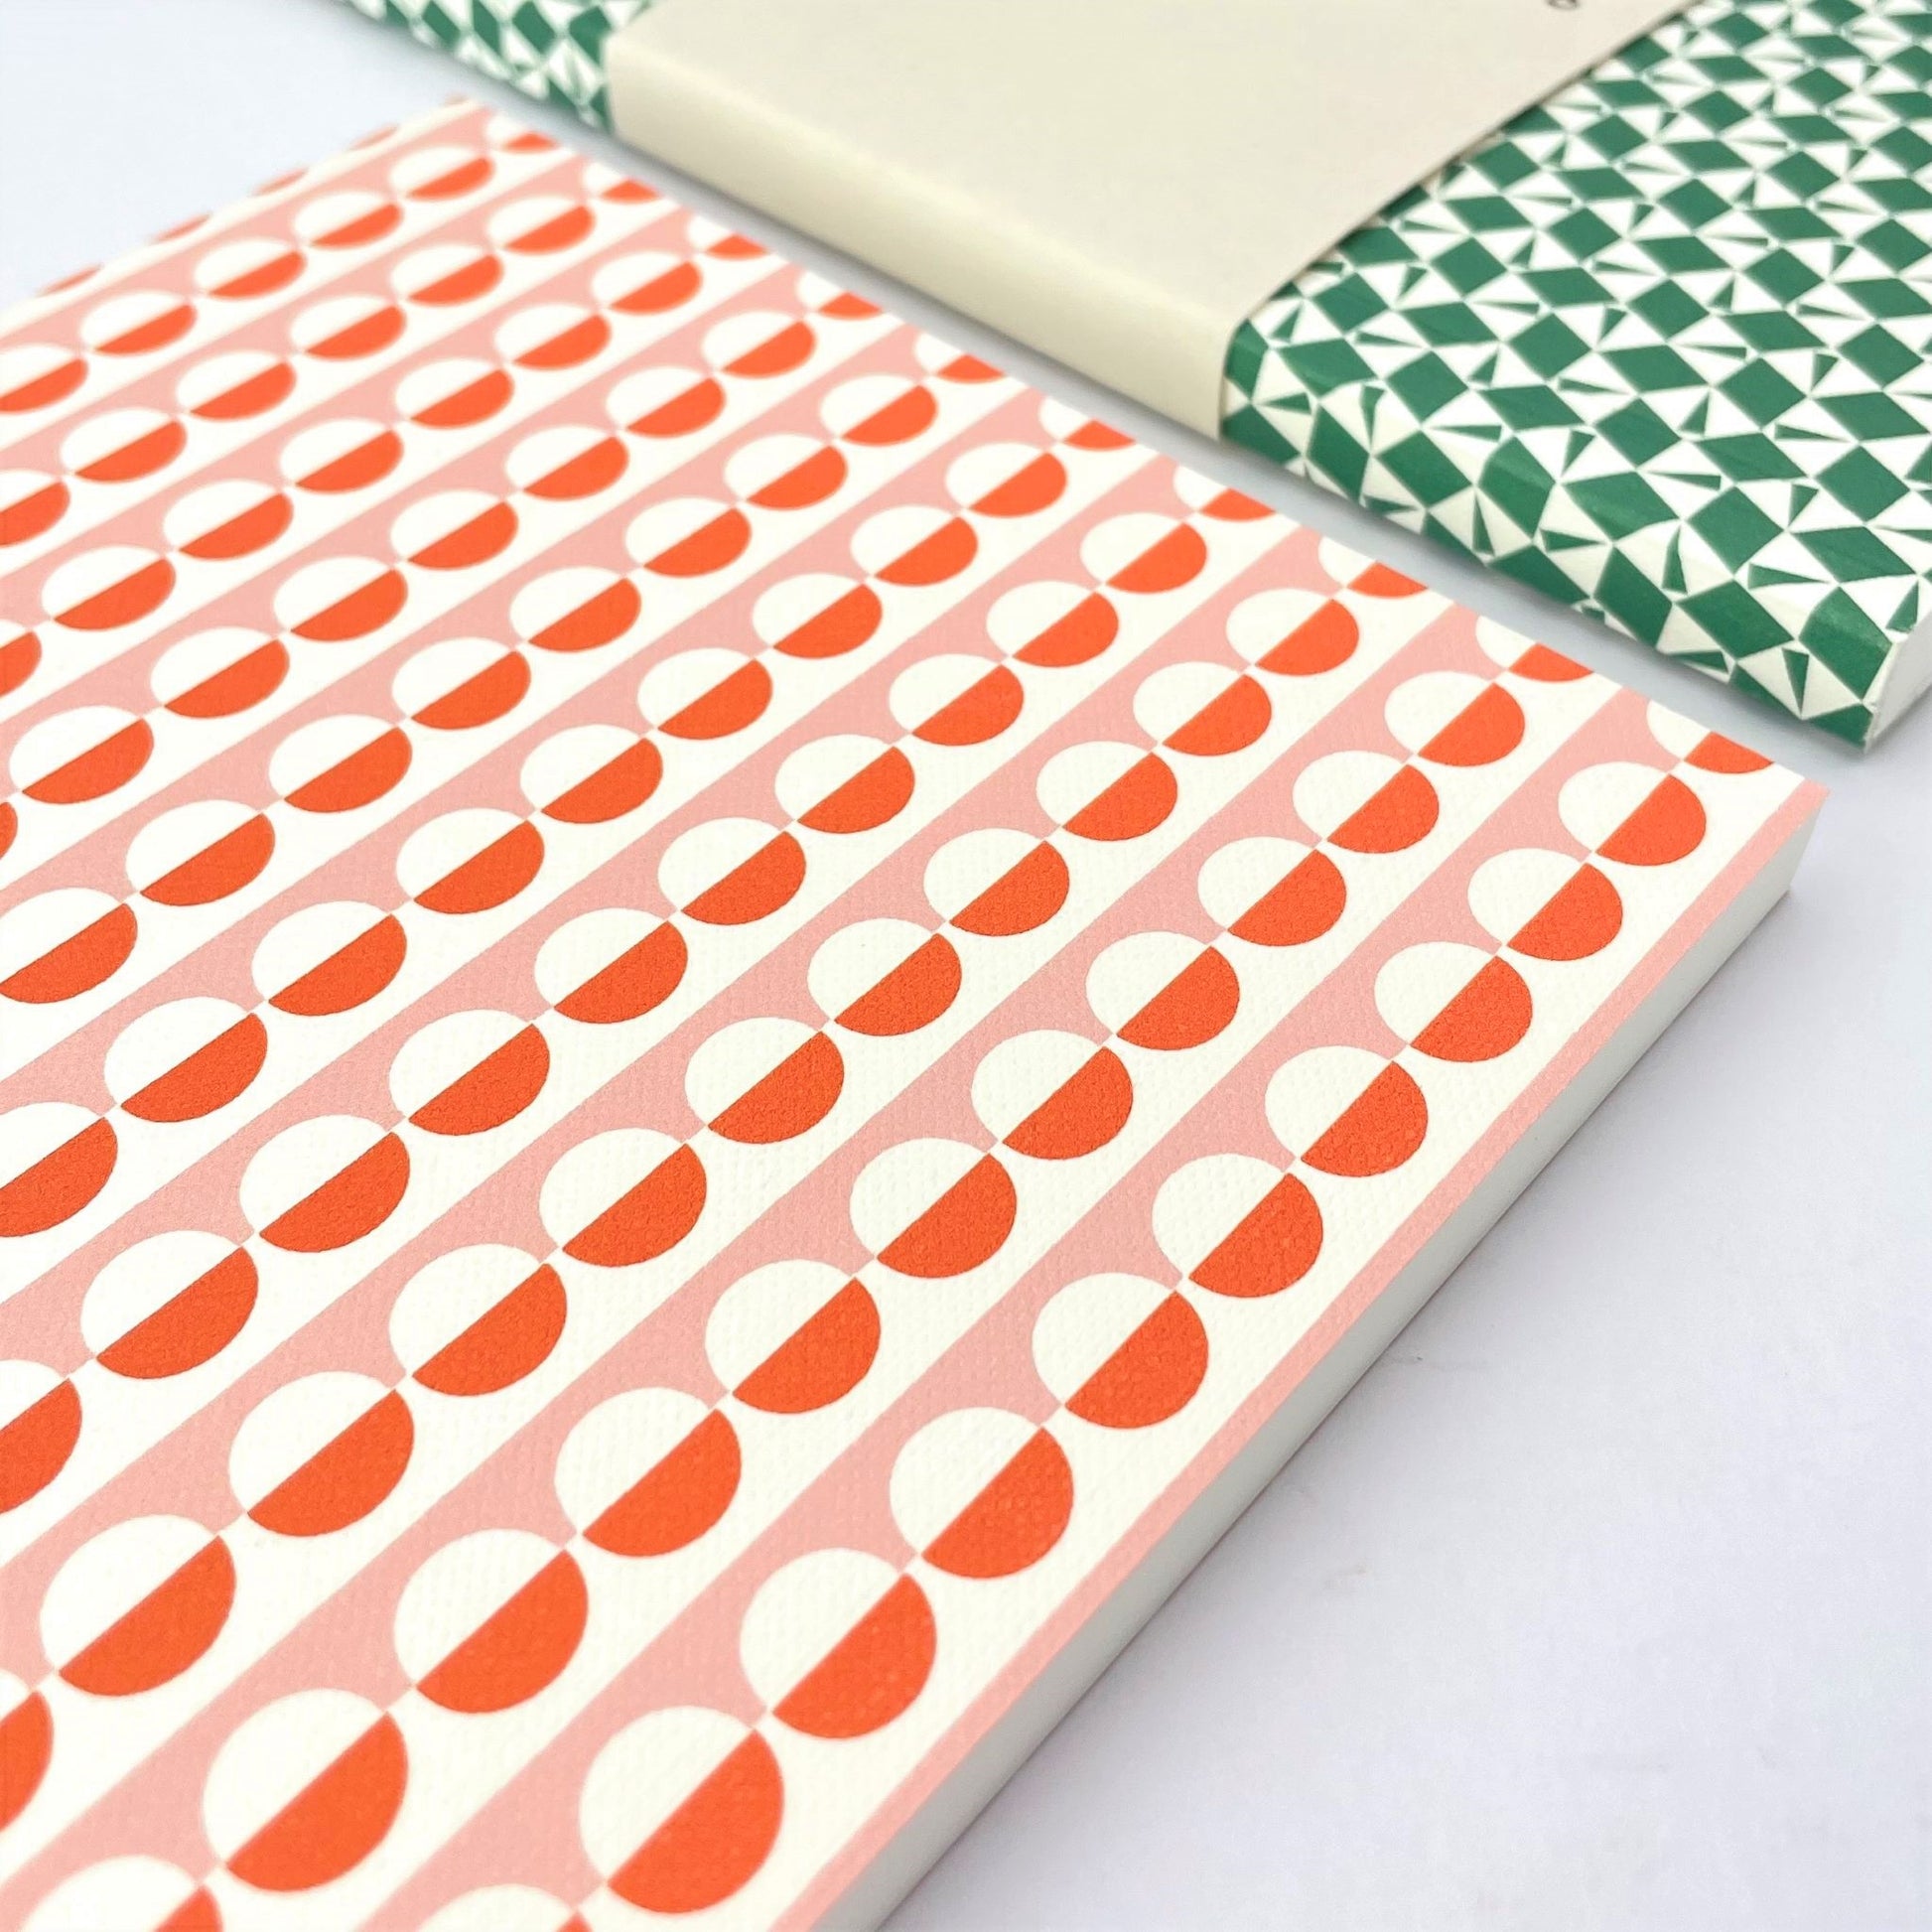 A5 softback notebook with geometric orange and pink repeat circle patterned cover. Plain inner pages, close-up